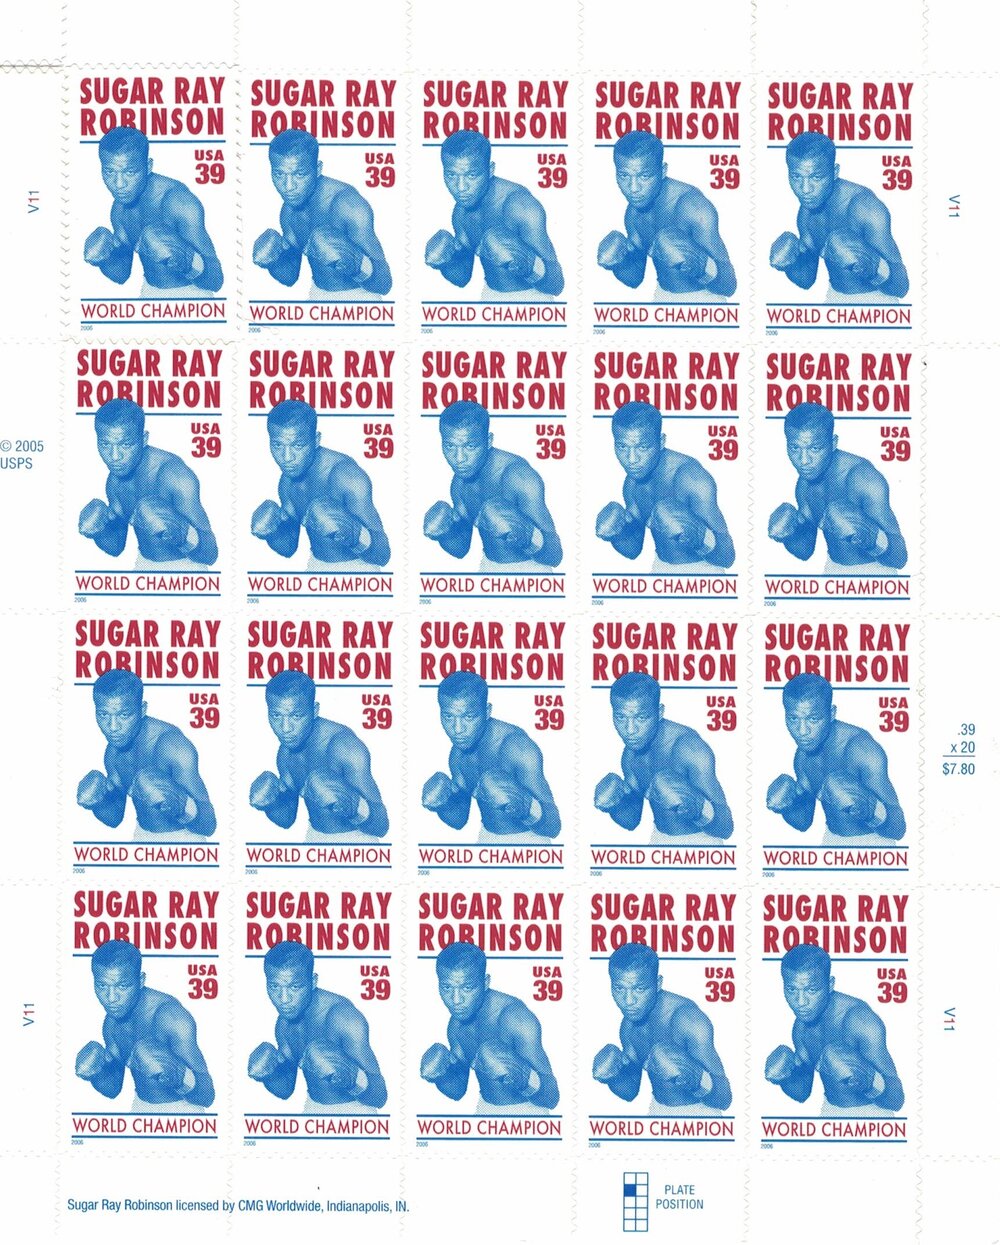 Sugar Ray Robinson 39 cent Postage Stamps